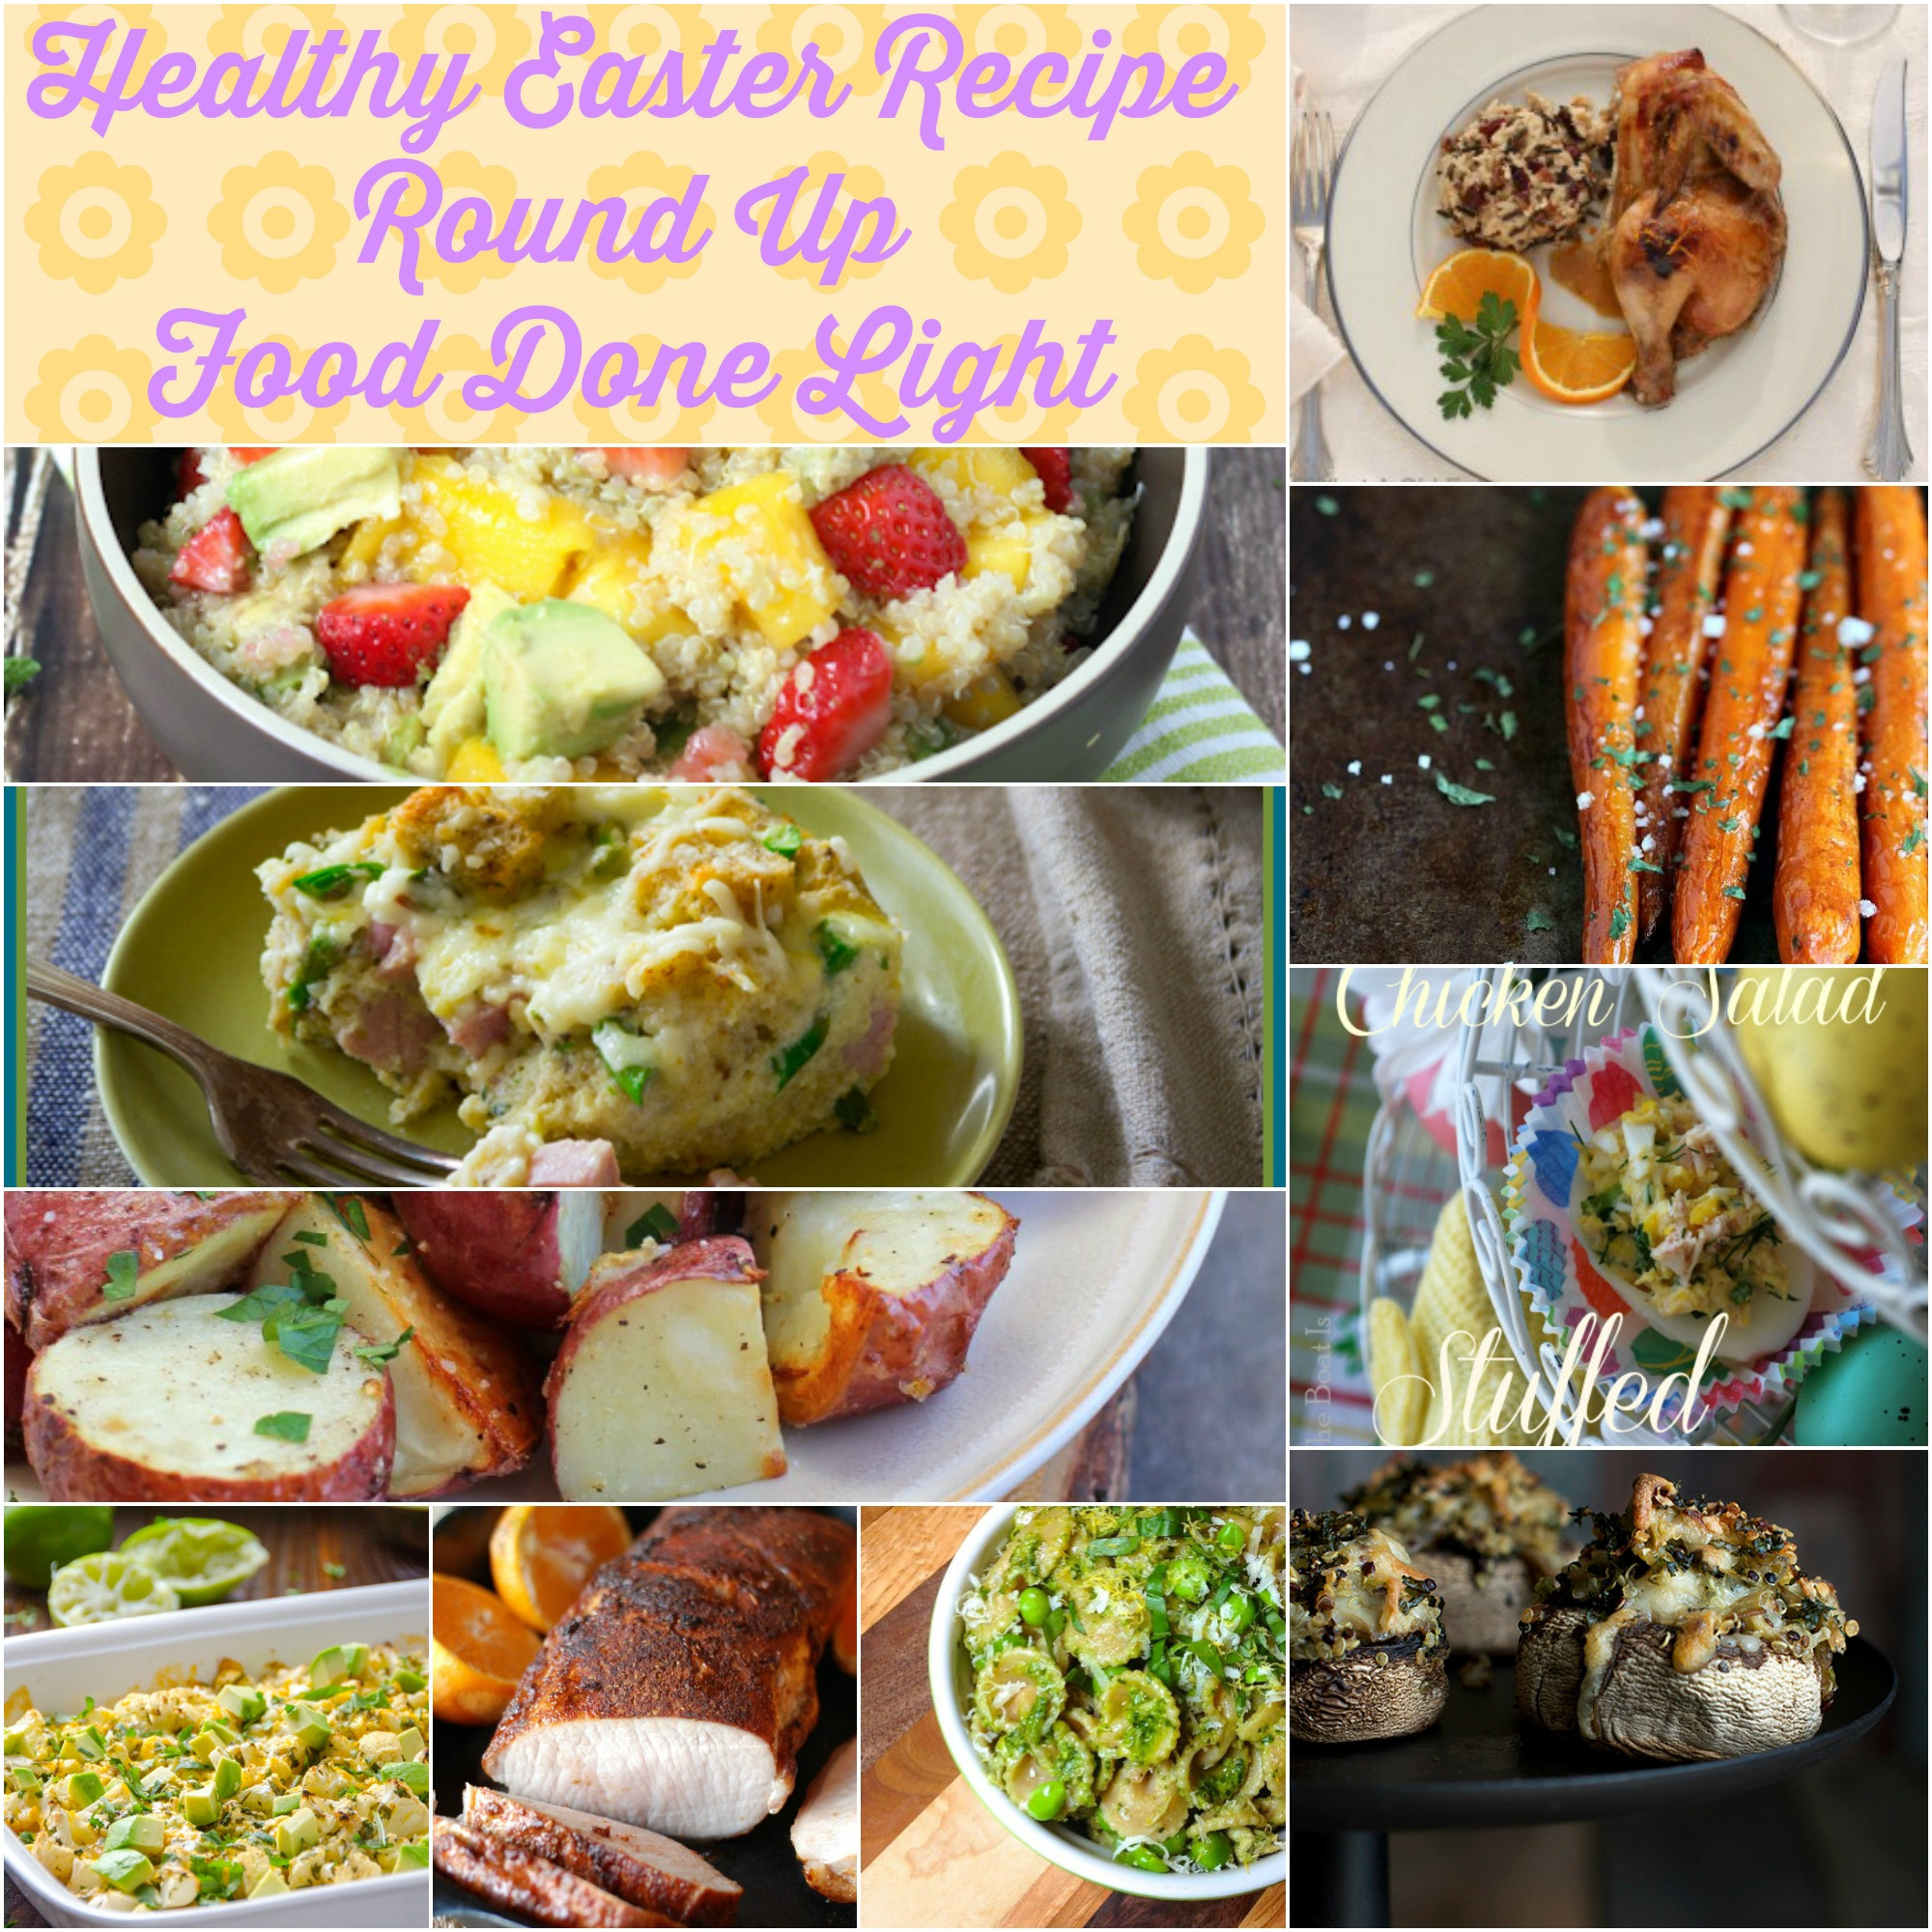 Receipes For Easter Dinner
 Healthy Easter Brunch Recipe Round Up Food Done Light